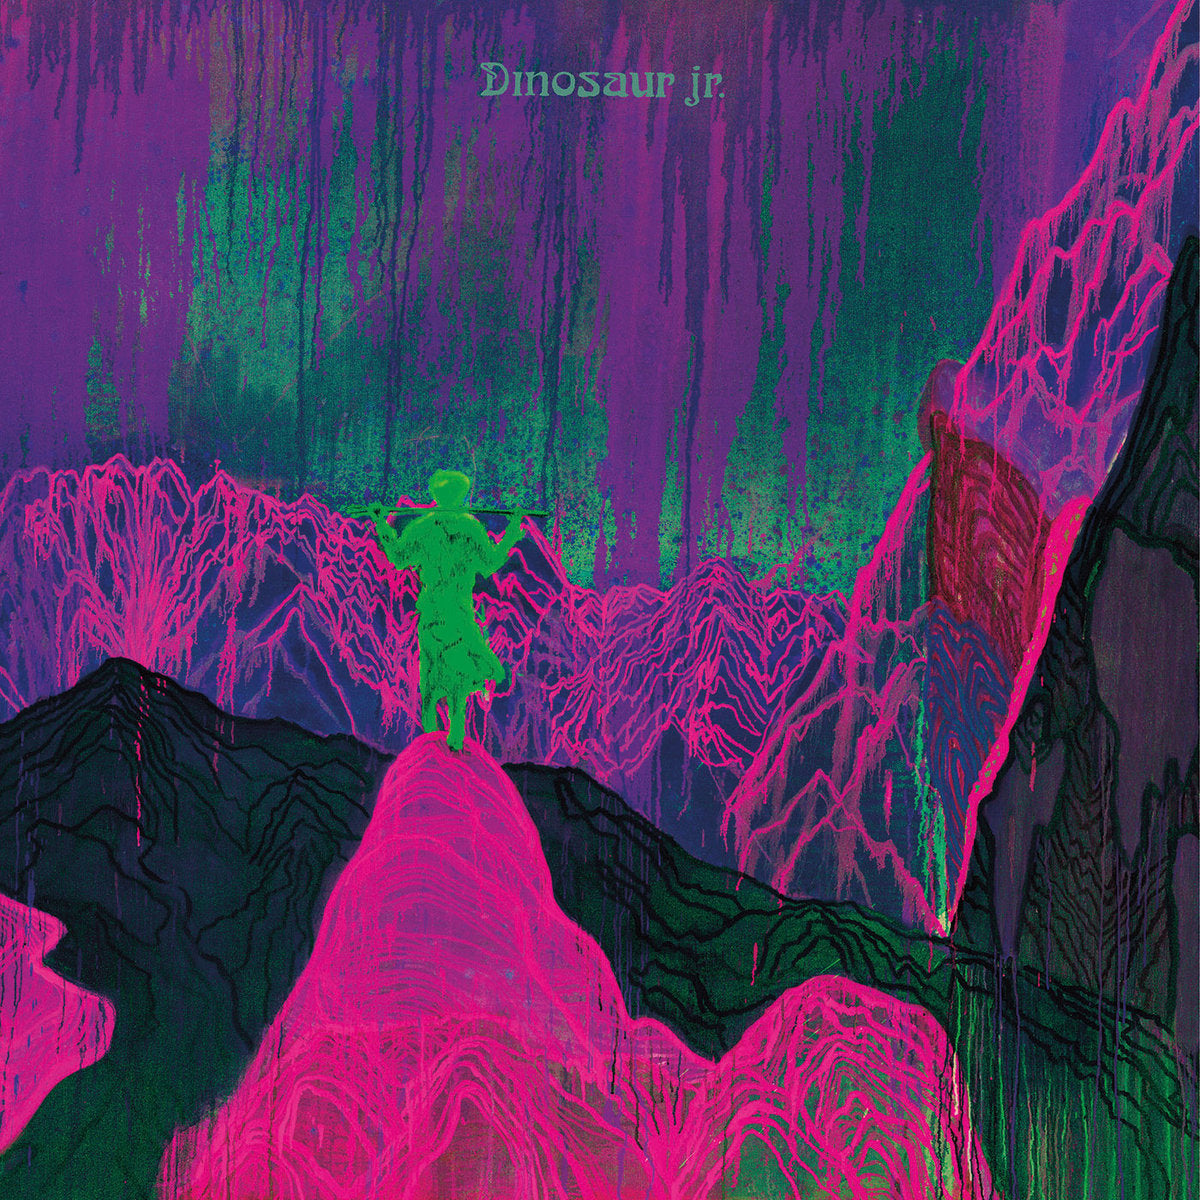 Dinosaur Jr. - Give a Glimpse of What Yr Not